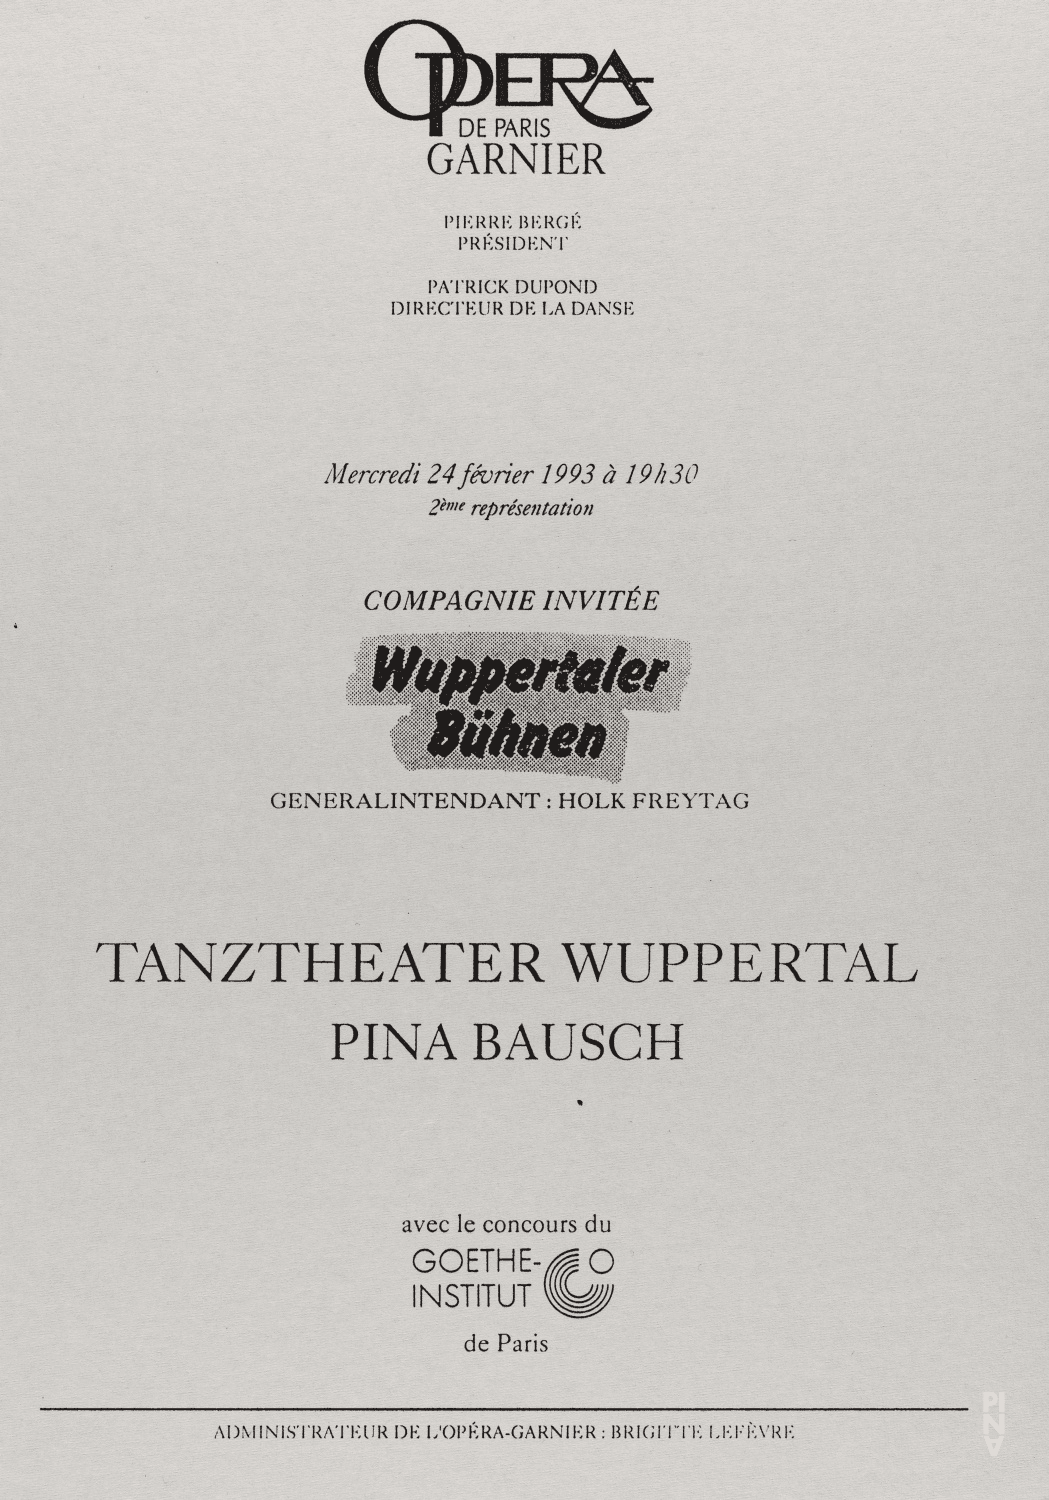 Evening leaflet for “Orpheus und Eurydike” by Pina Bausch with Tanztheater Wuppertal in in Paris, Feb. 24, 1993